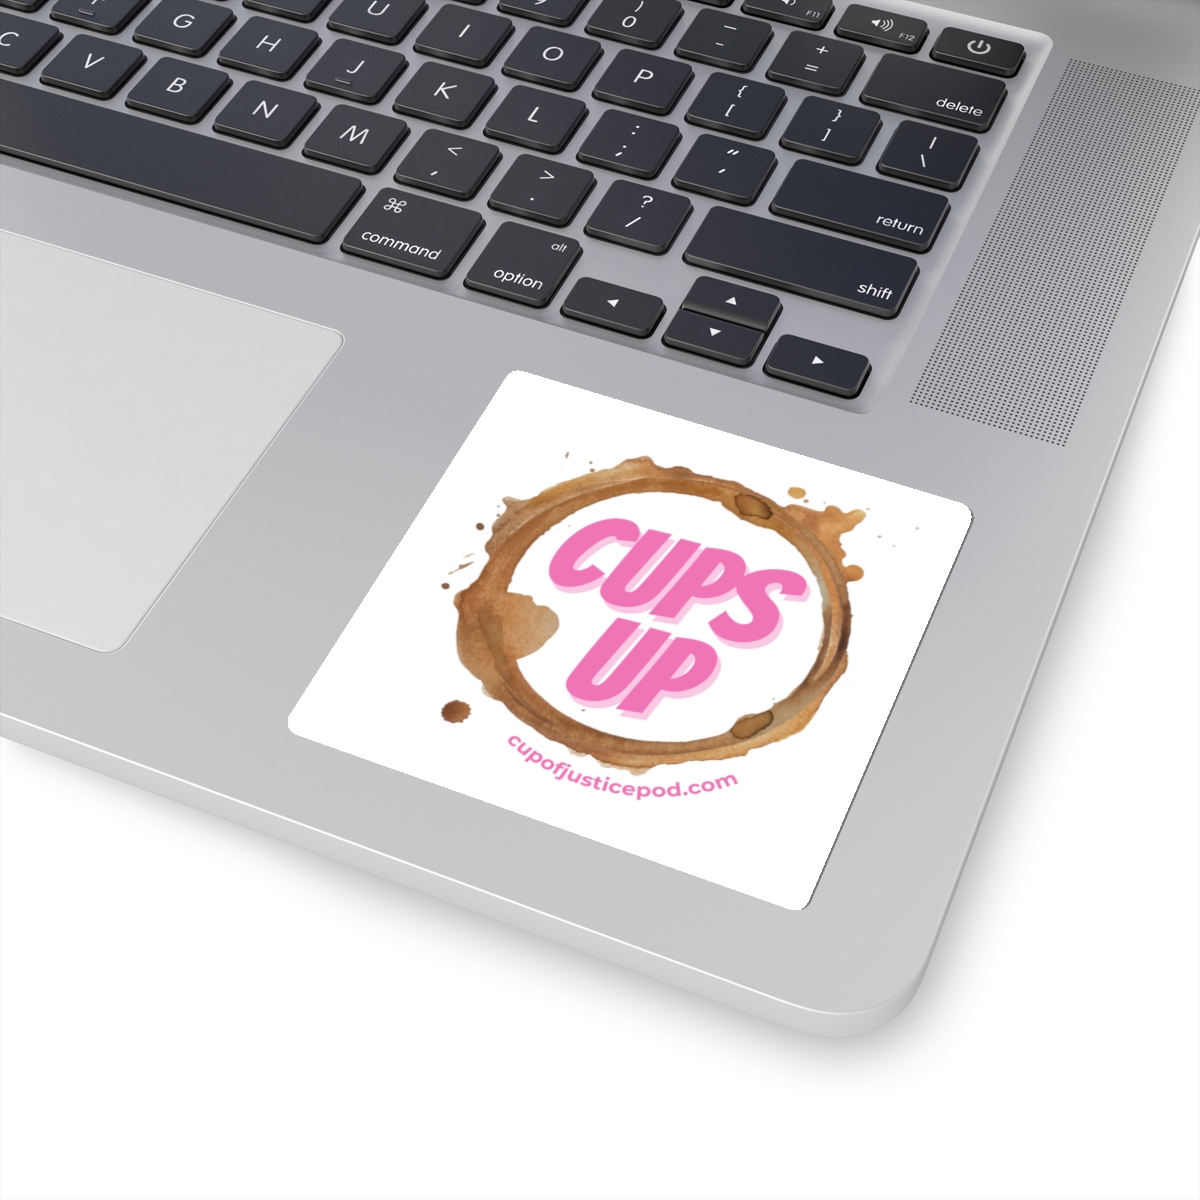 Cups Up Kiss-Cut Stickers product thumbnail image